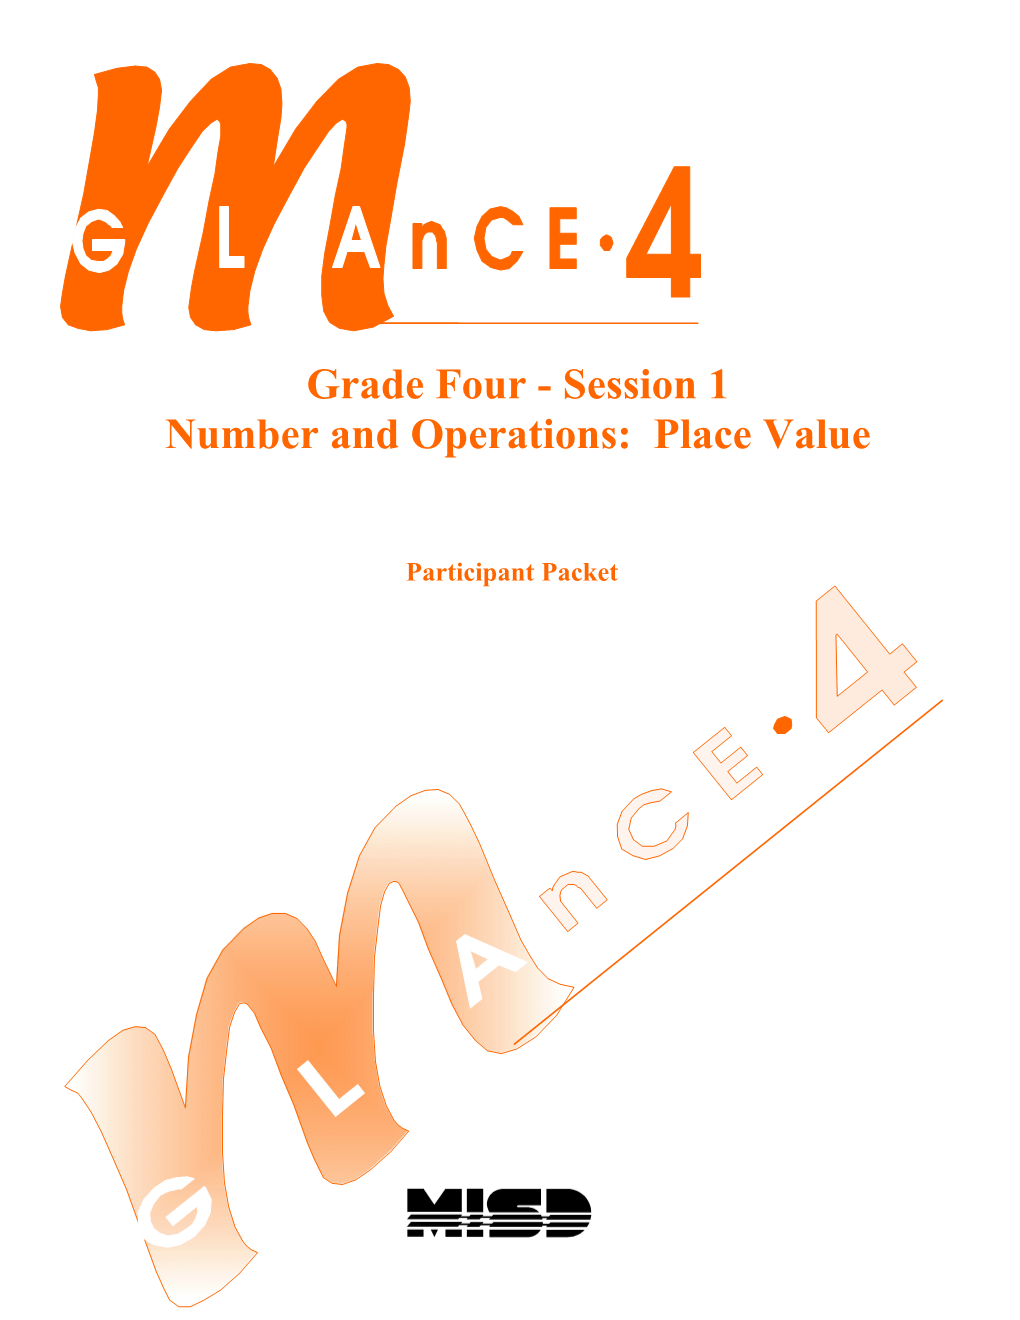 Grade 4: Number Notation, Place Value, and Addition/Subtraction of Whole Numbers